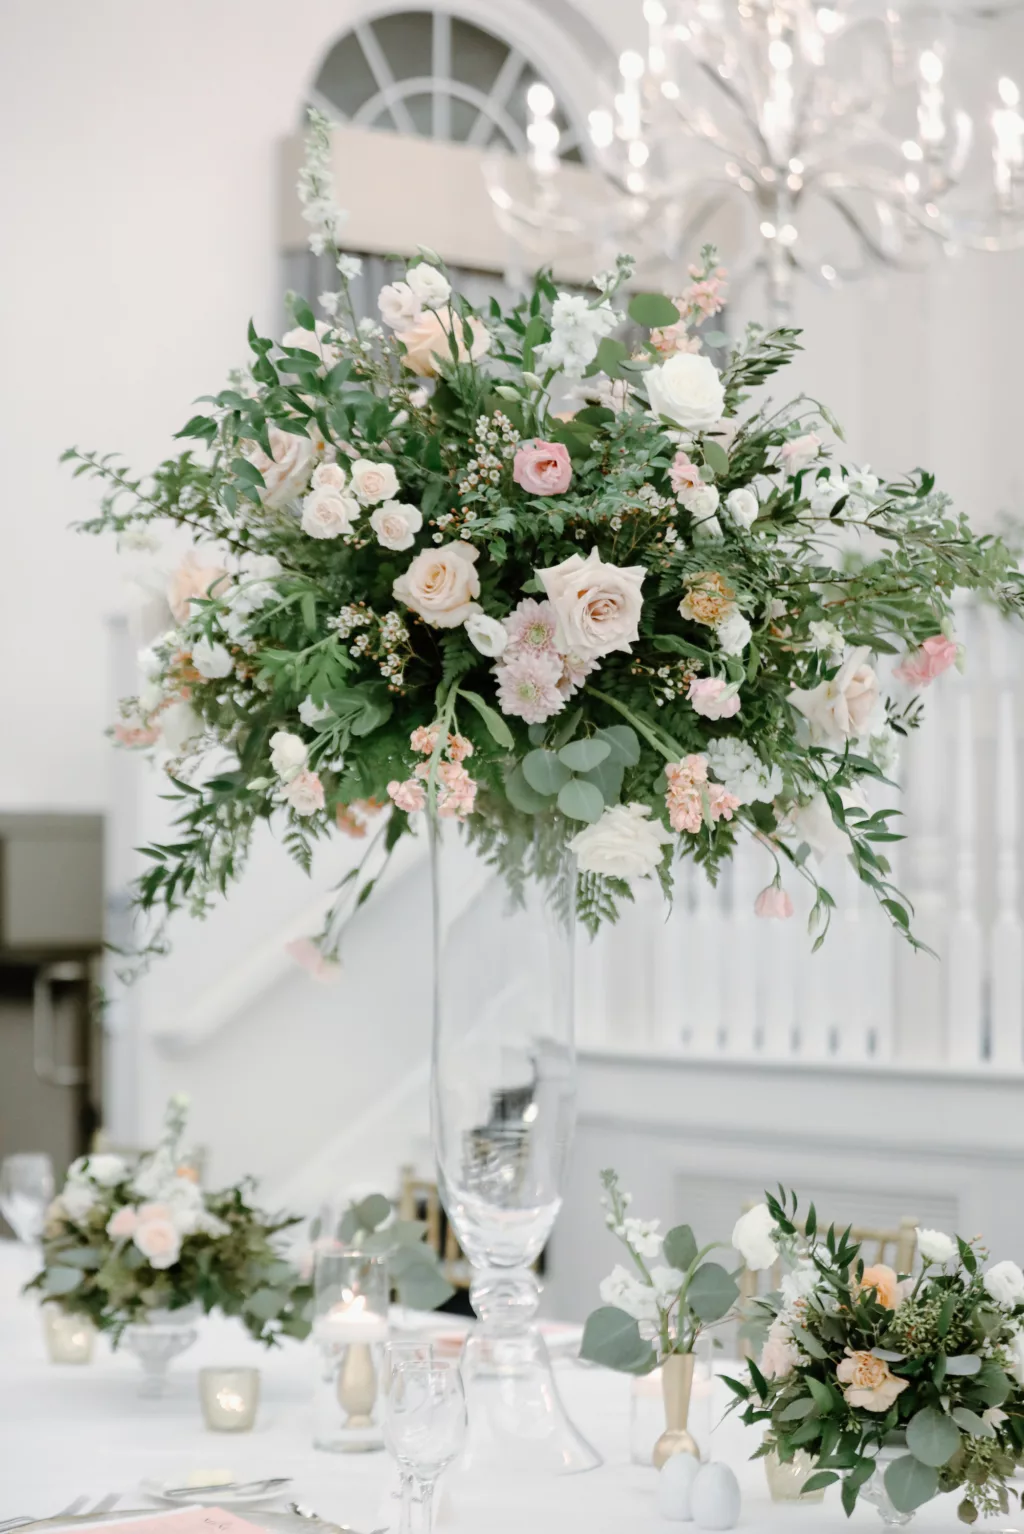 Floral Chandelier with Pink and White Roses, and Greenery | Classic White and Blush Wedding Reception Decor Ideas